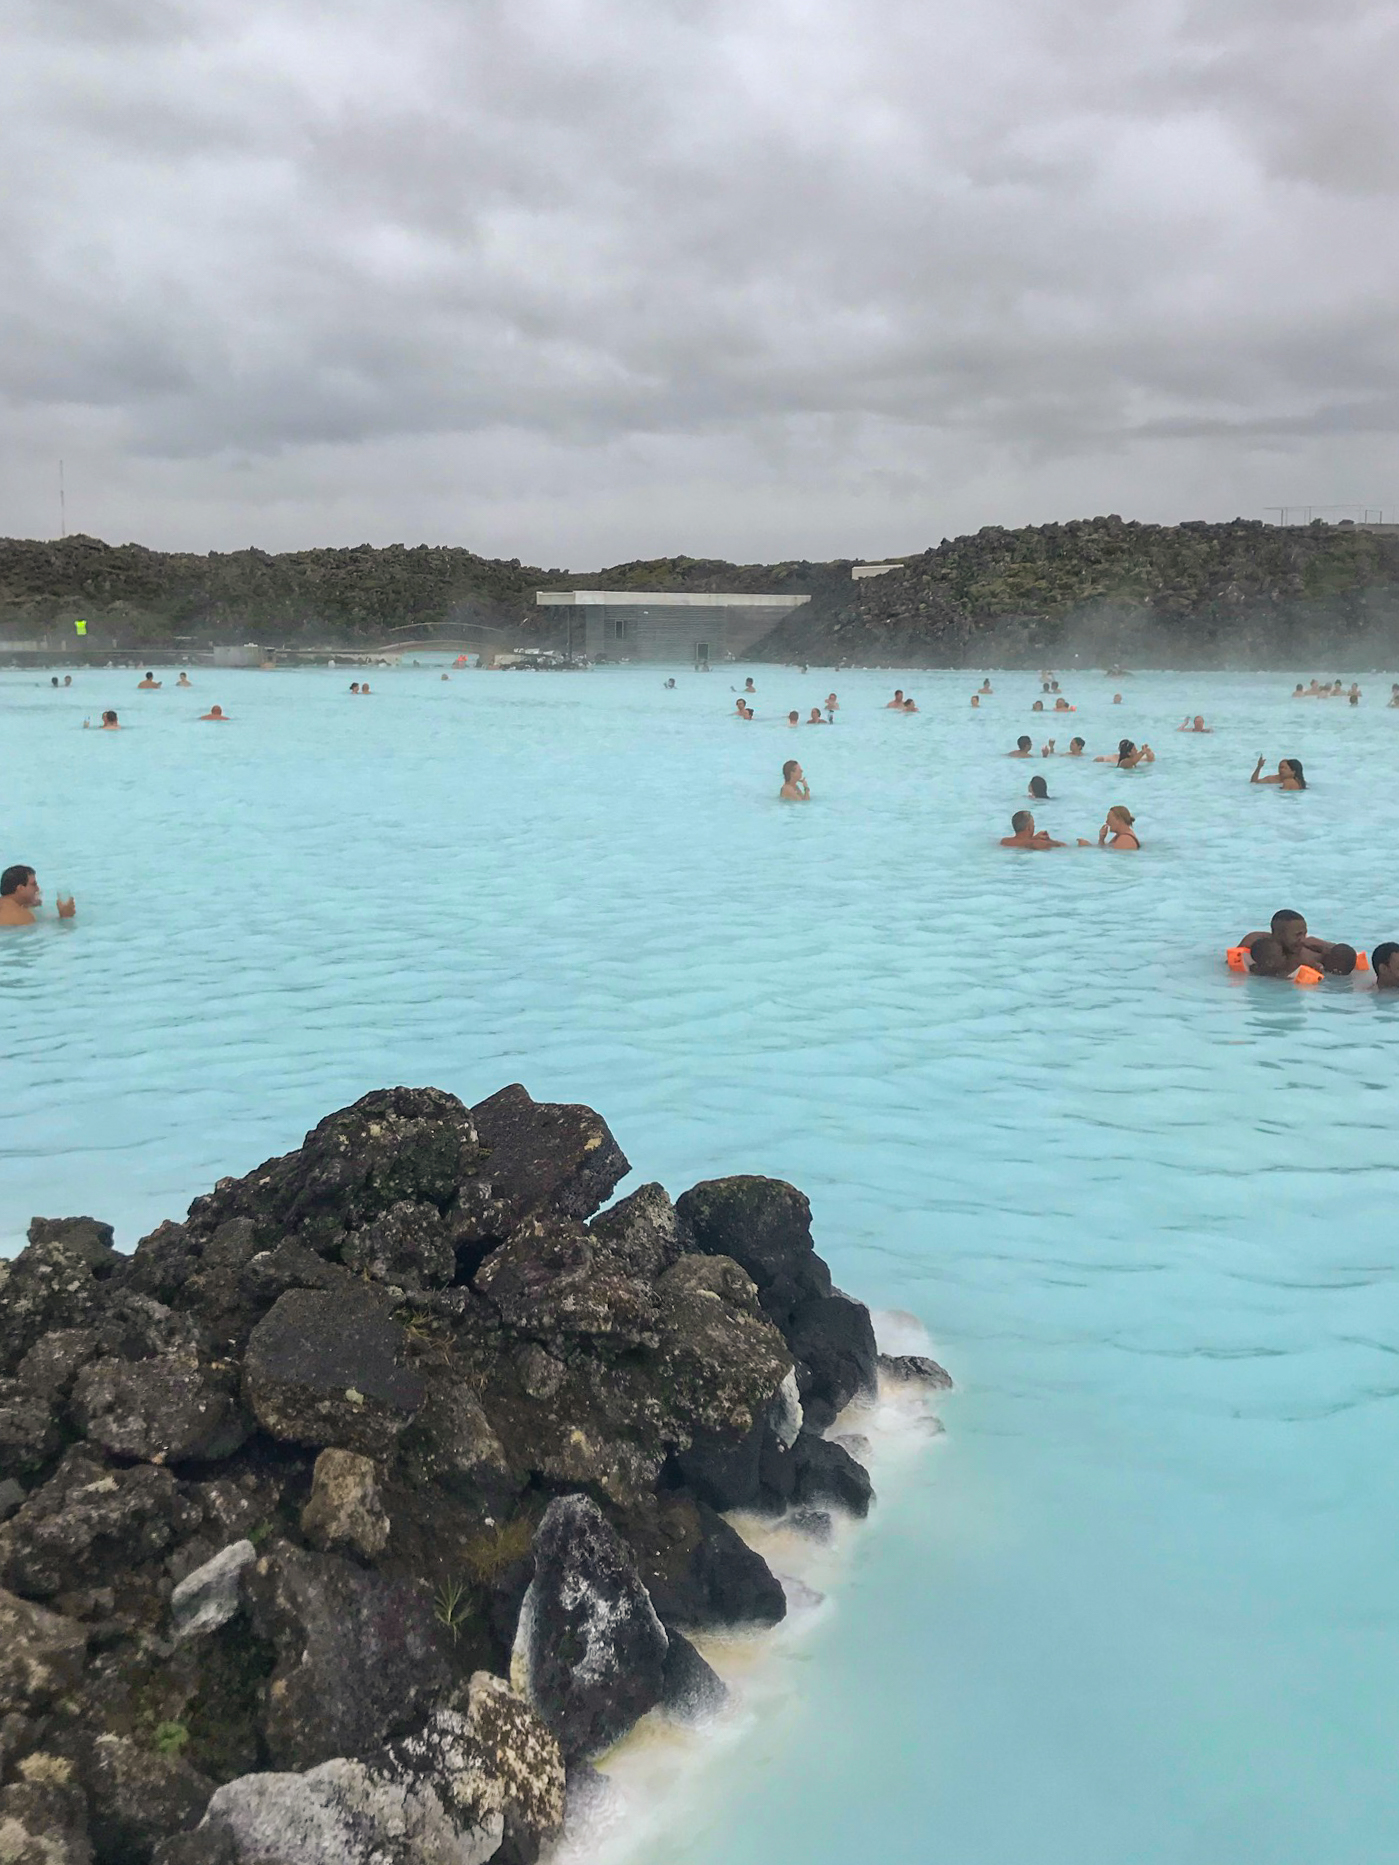 Pool area at the Blue Lagoon in Iceland